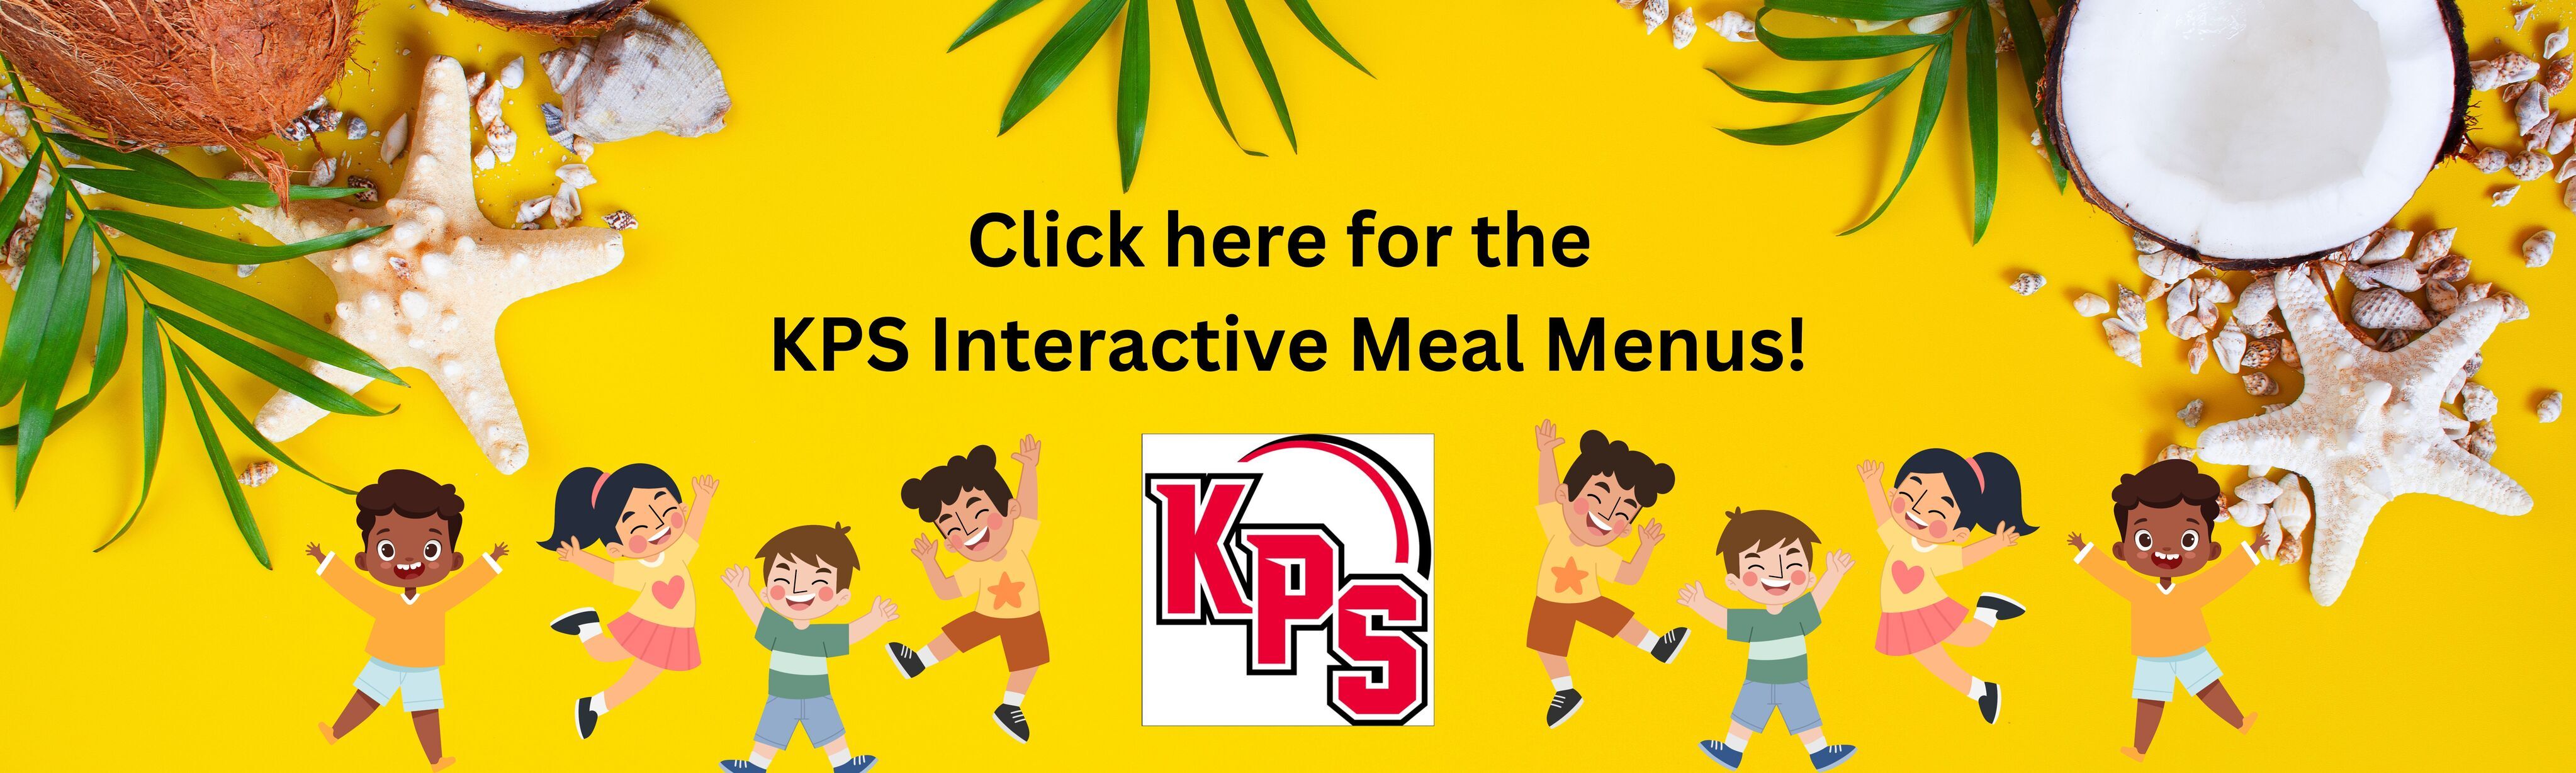 Link for Interactive Meal Menu